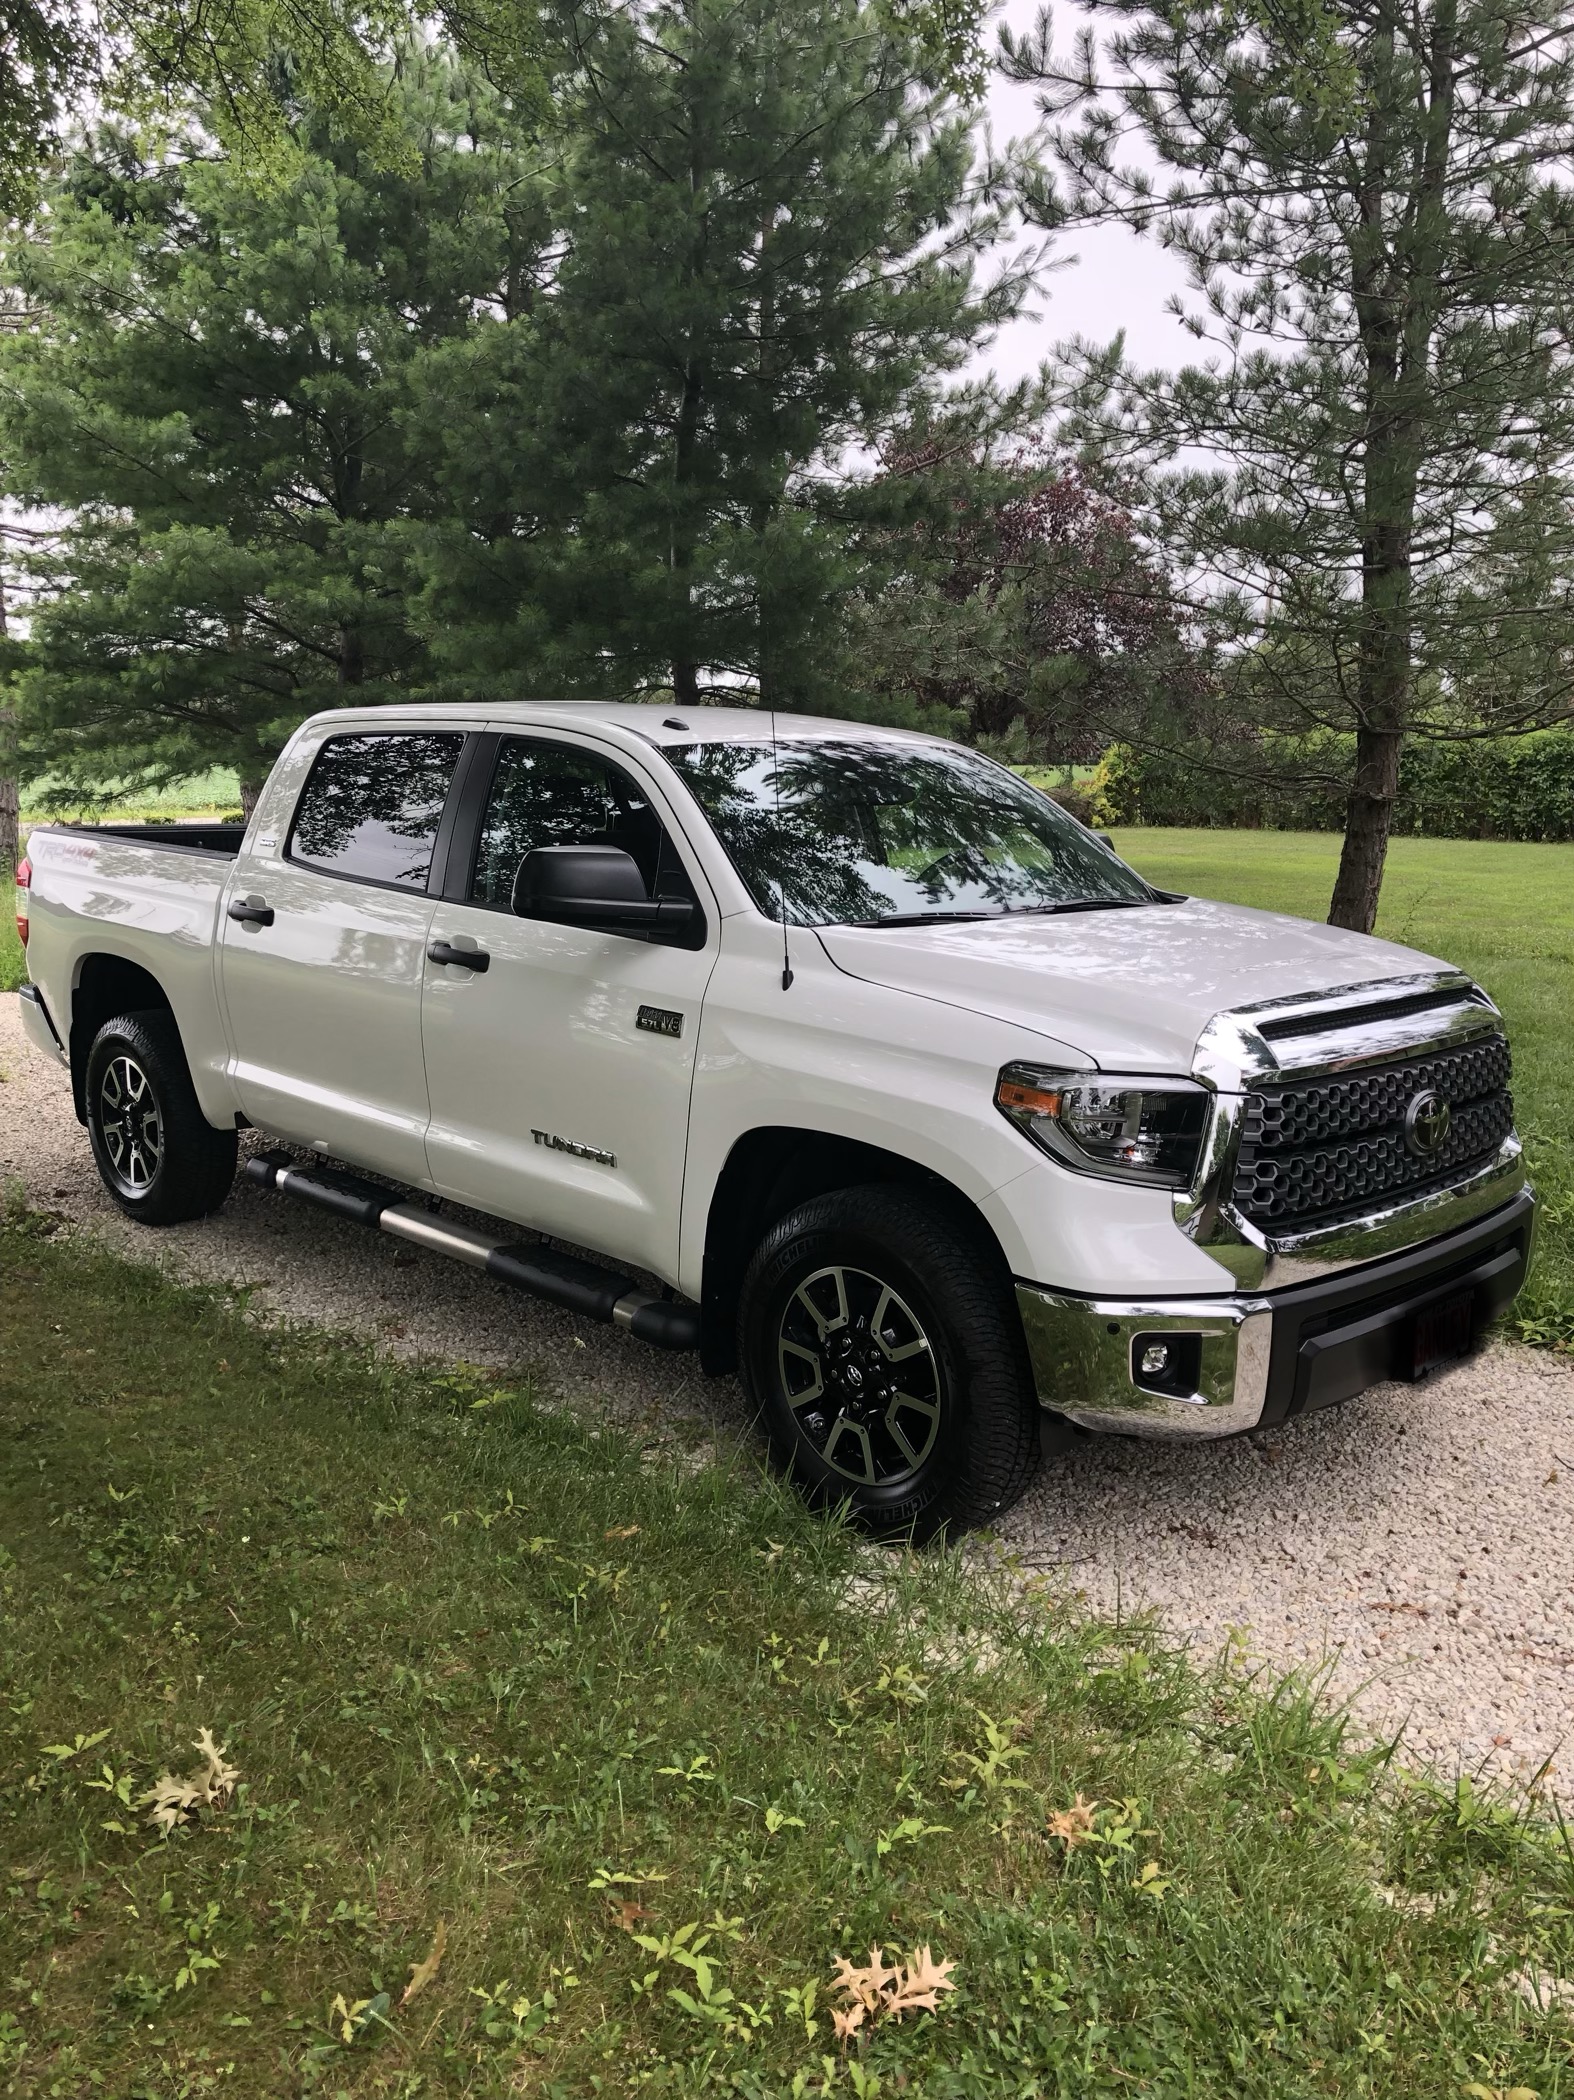 Toyota Tundra Sr5 Crewmax Lease 299 All In 1k Das 24 12k Share Deals Tips Leasehackr Forum